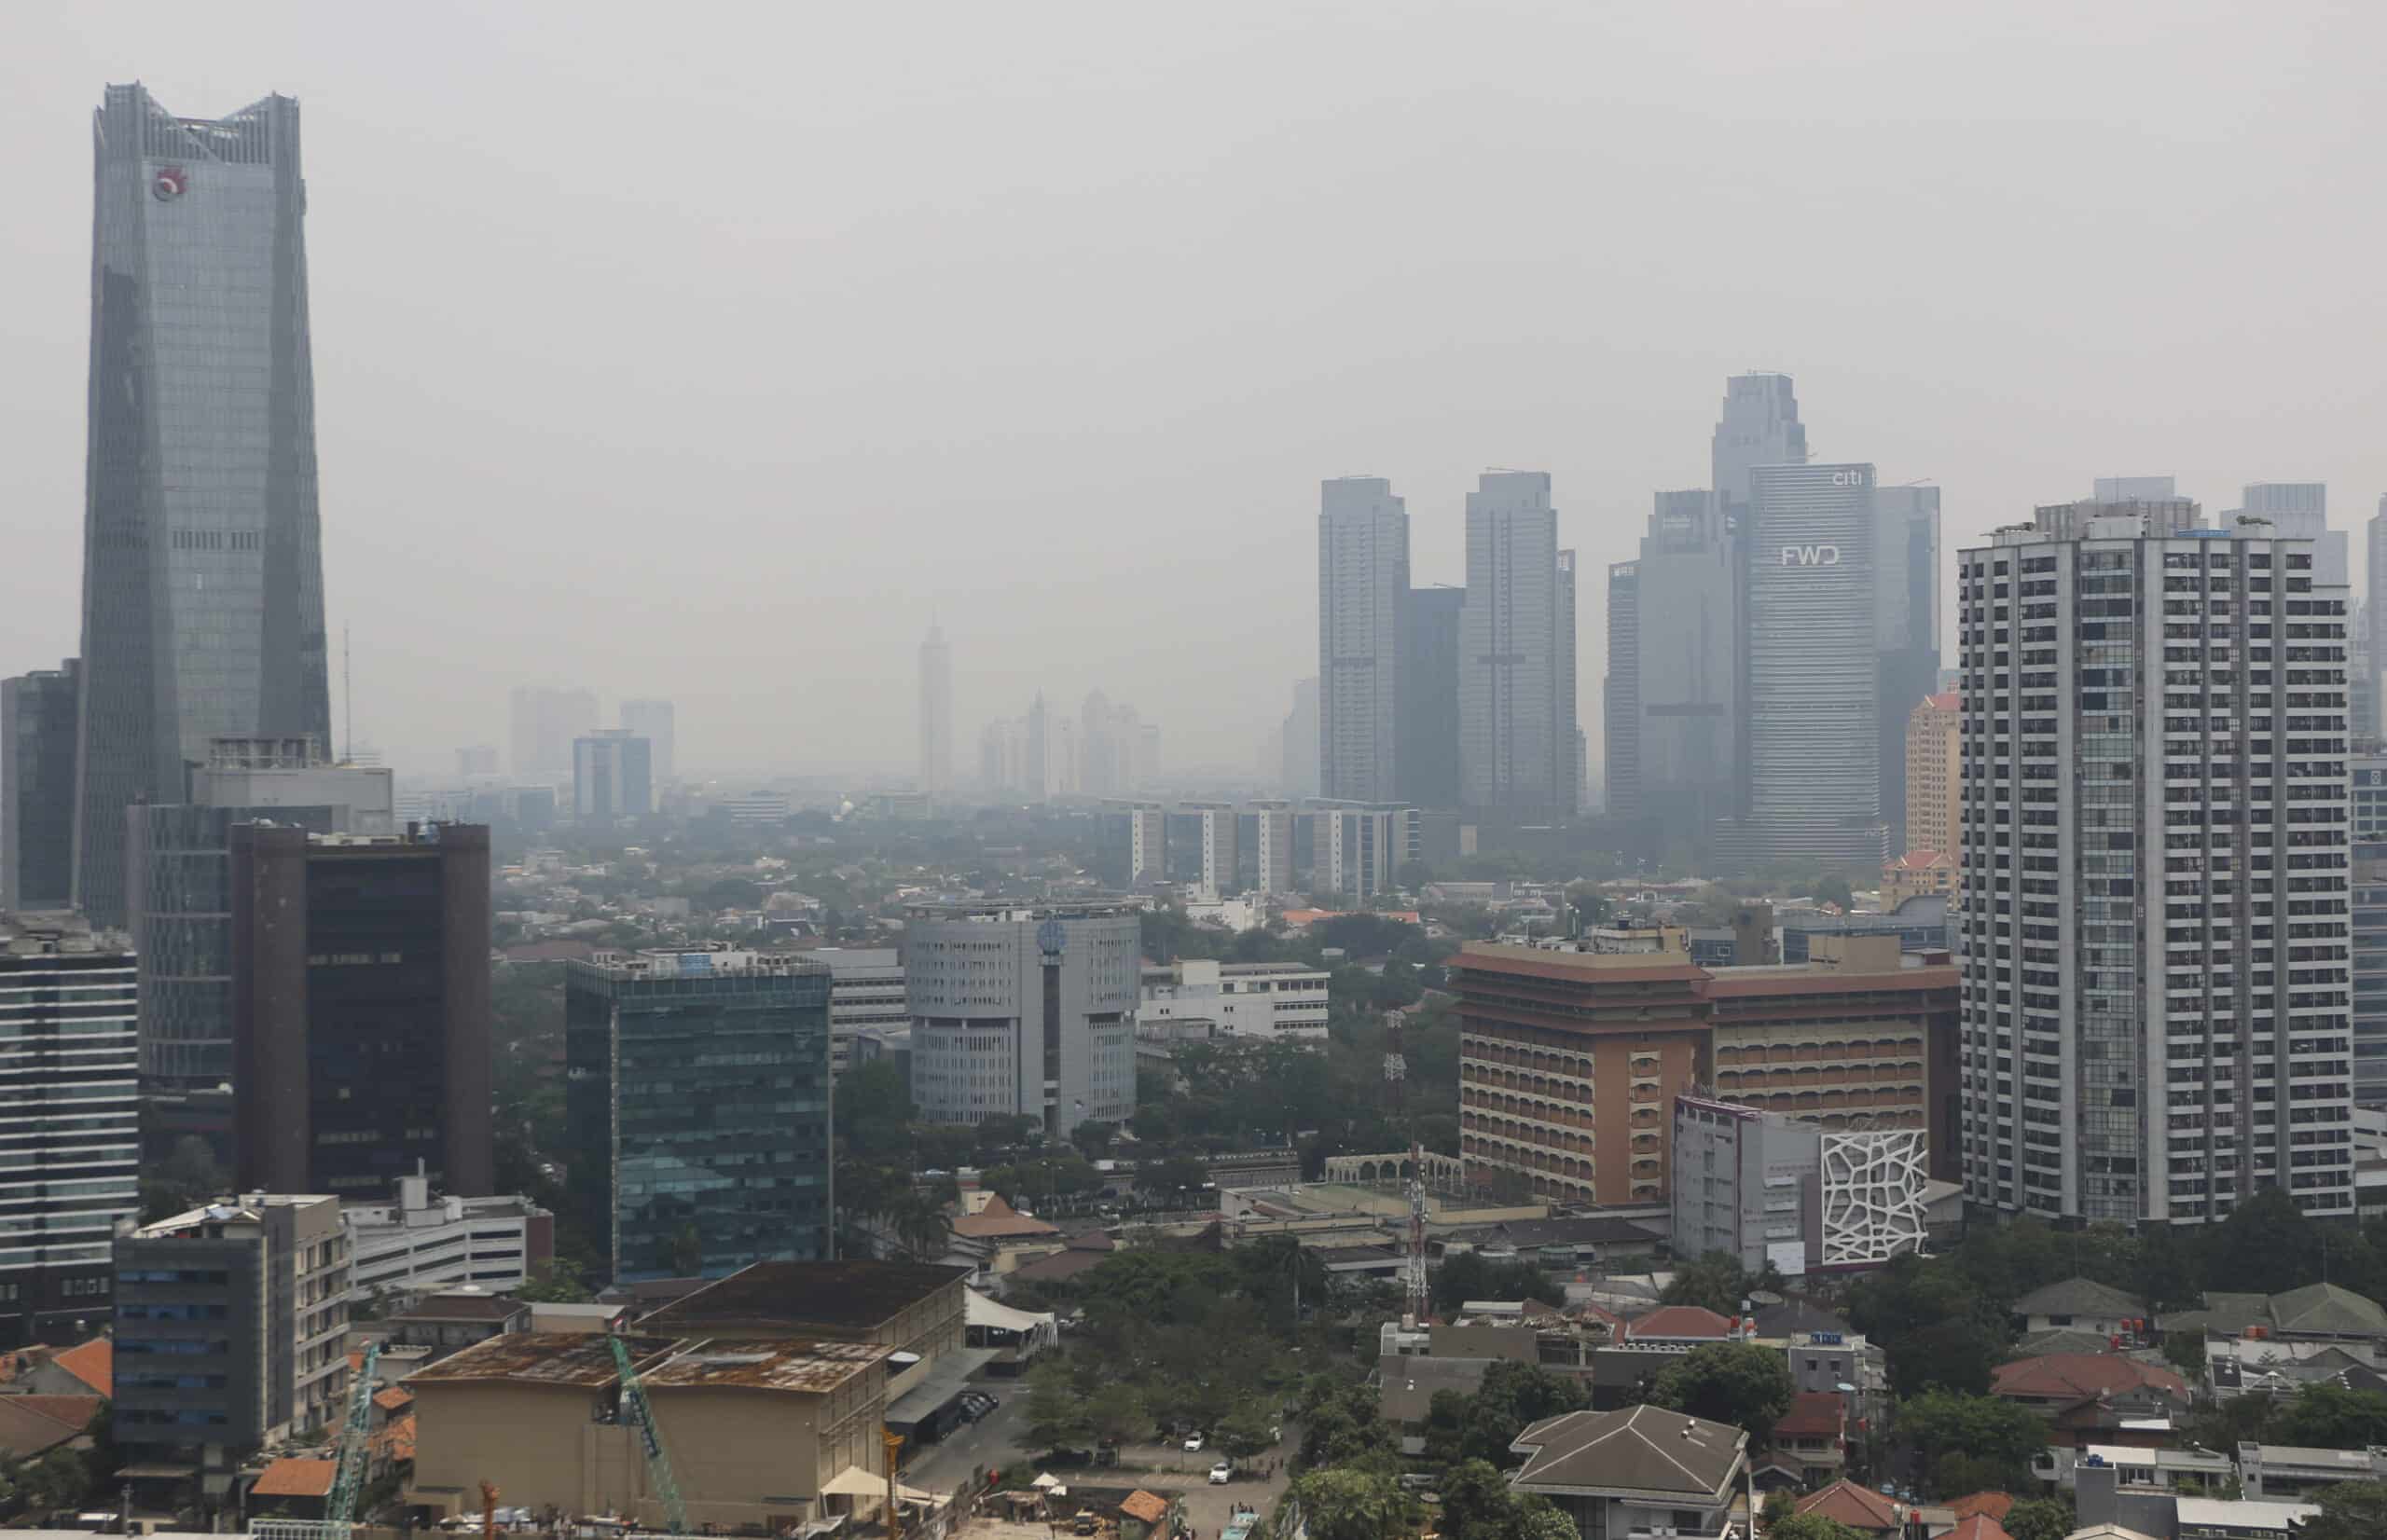 General view of the Indonesian capital city of Jakarta as the smog covers the city